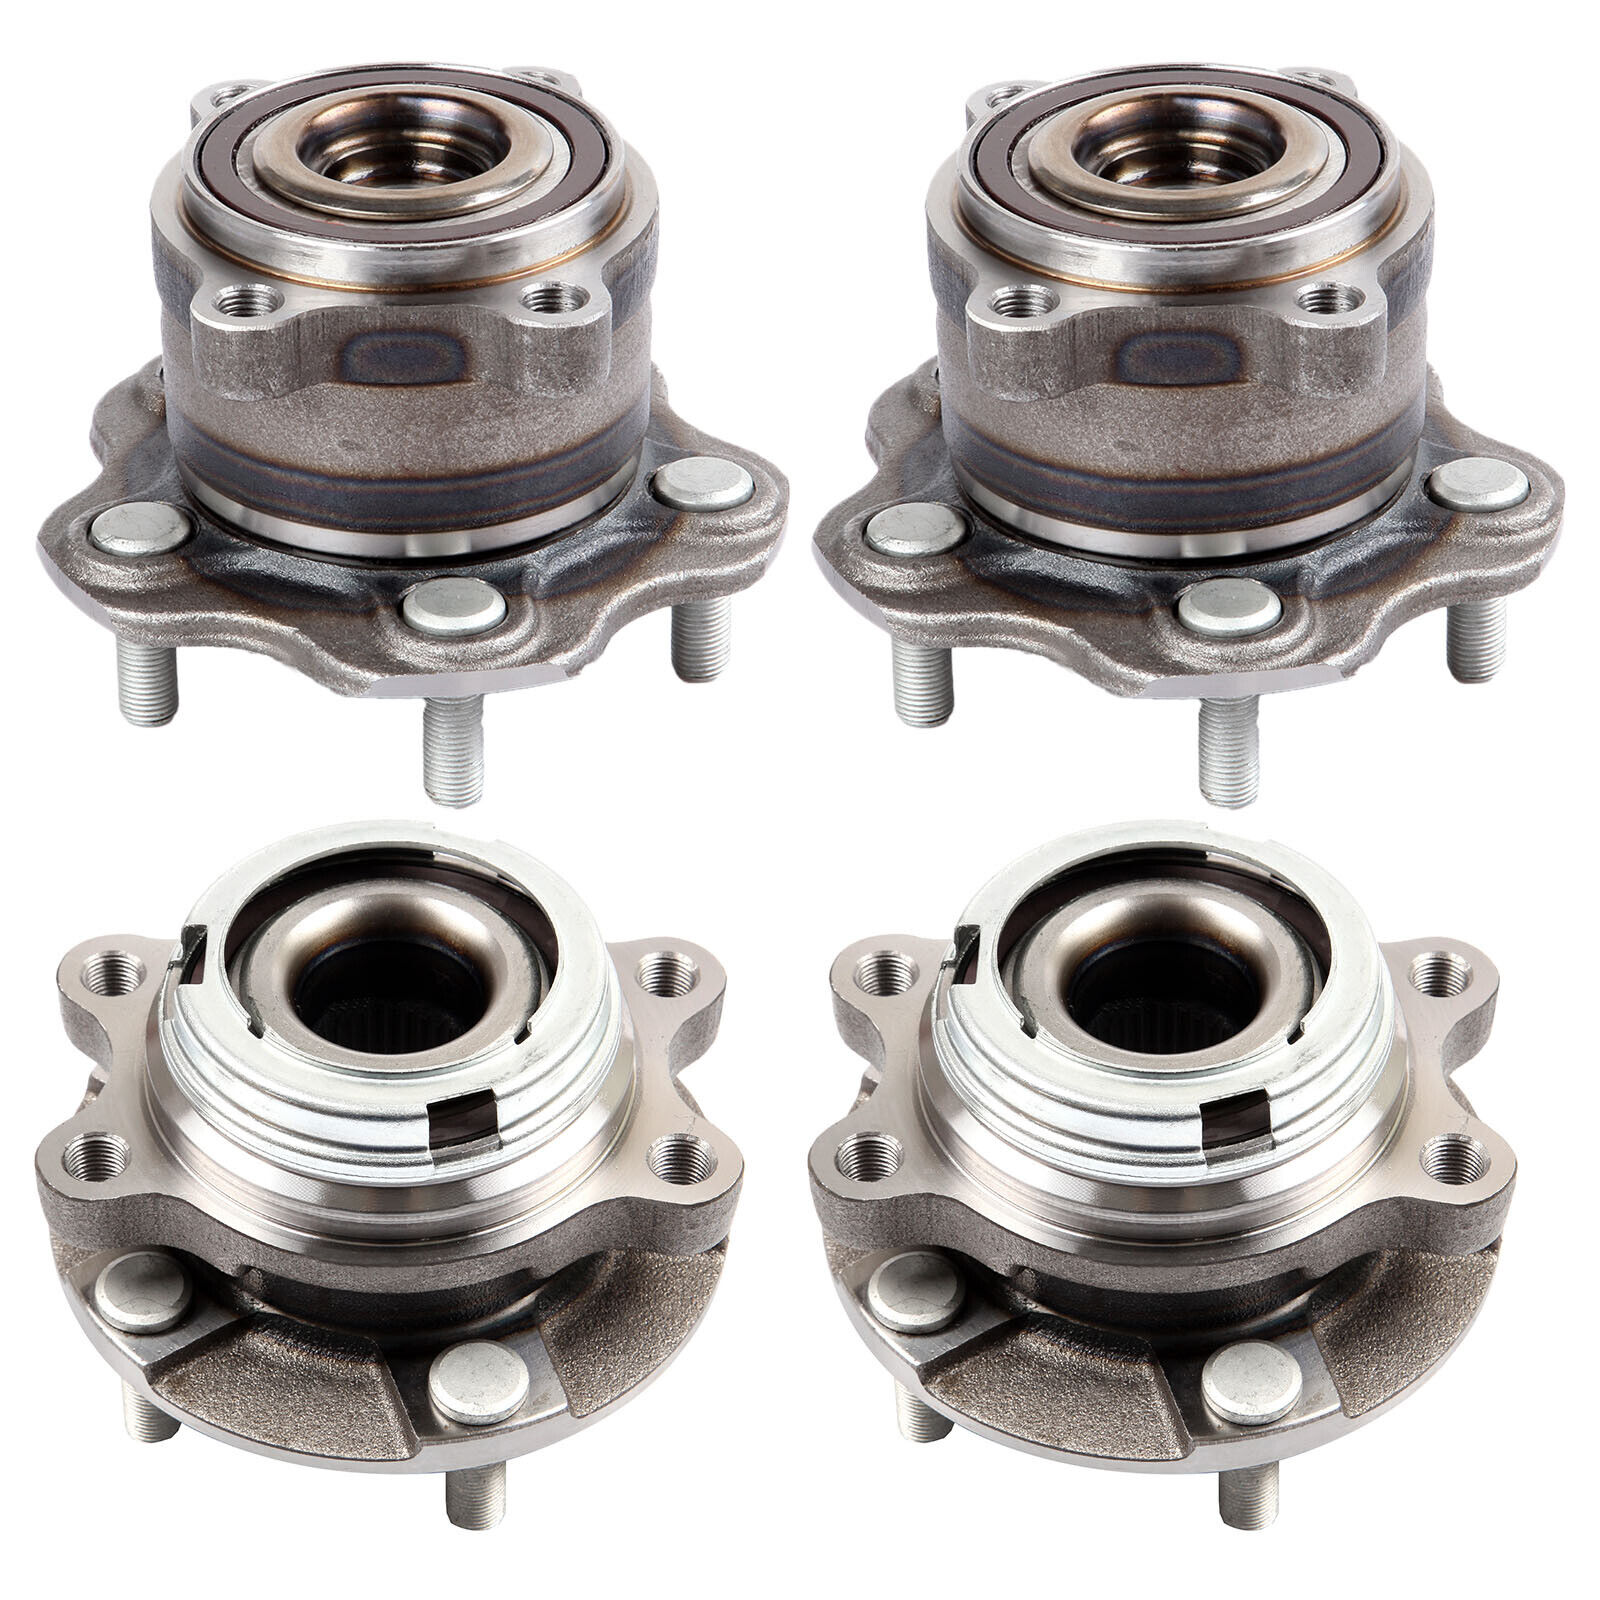 4x Front Rear Wheel Hub Bearing Assembly For Nissan Murano Pathfinder Altima